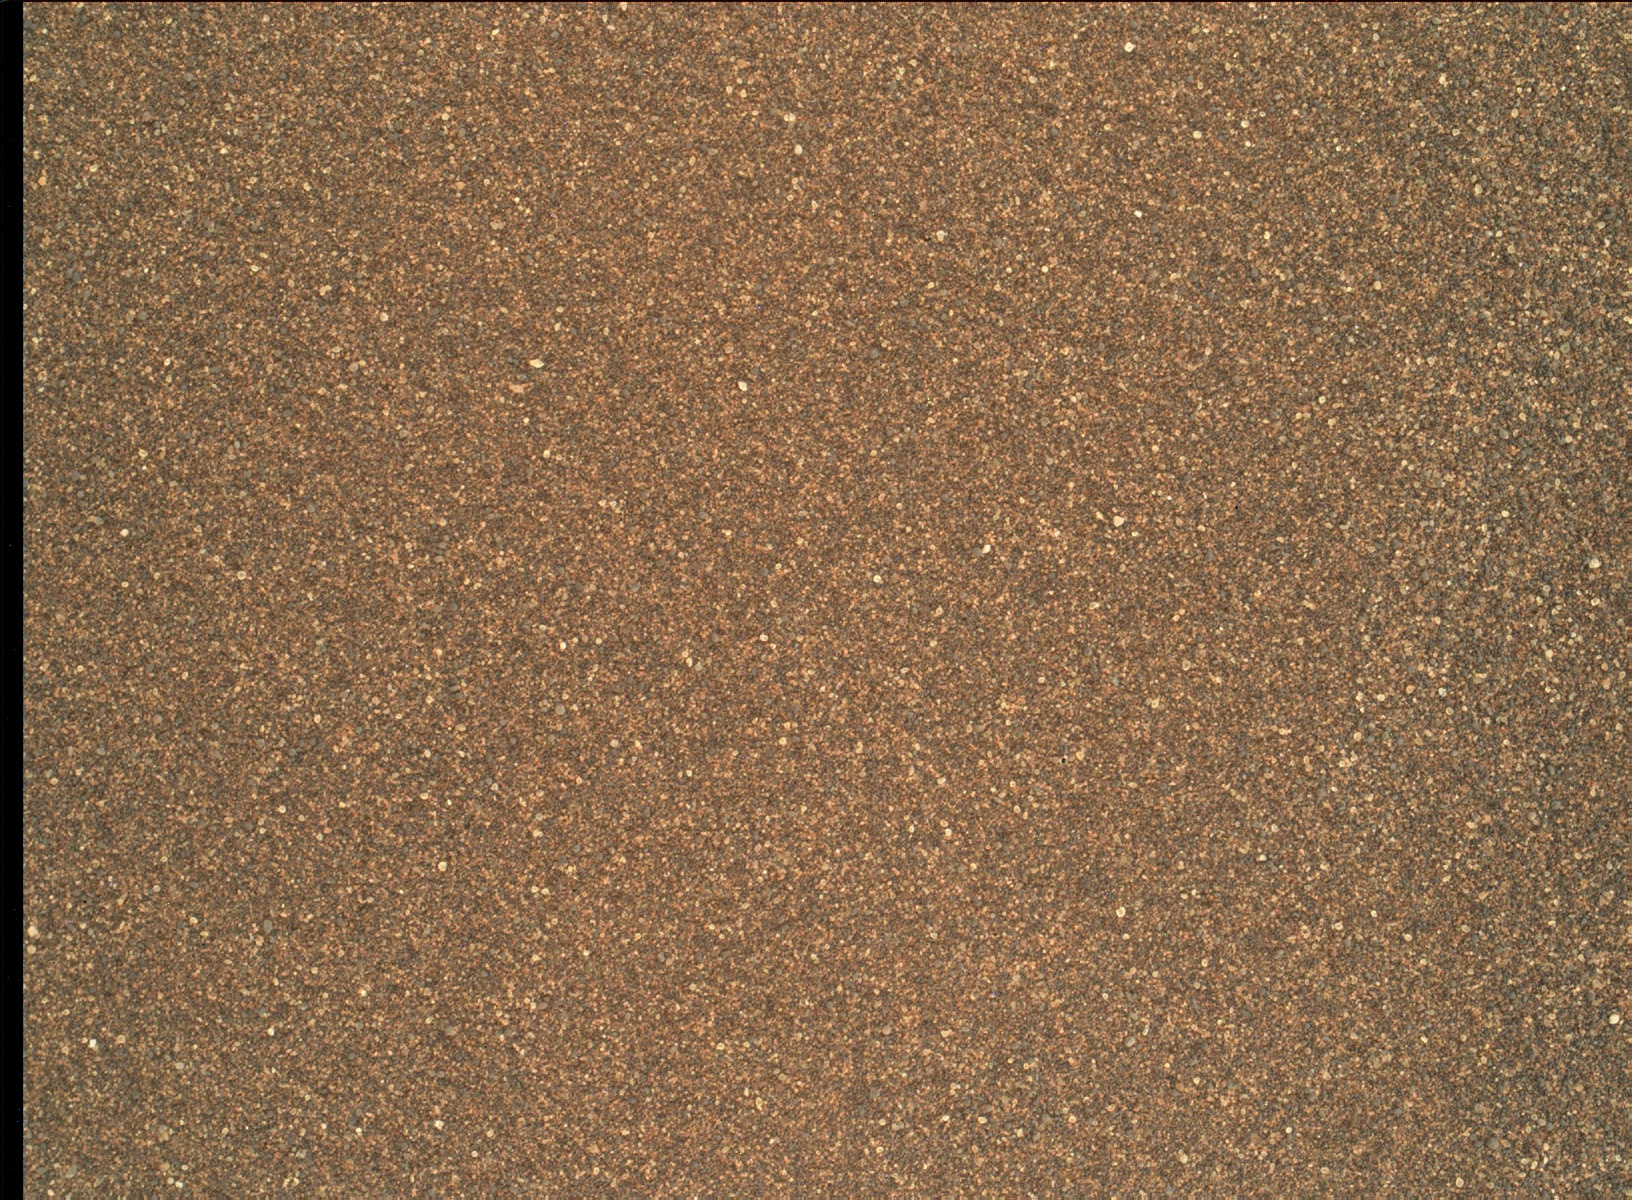 Nasa's Mars rover Curiosity acquired this image using its Mars Hand Lens Imager (MAHLI) on Sol 2027